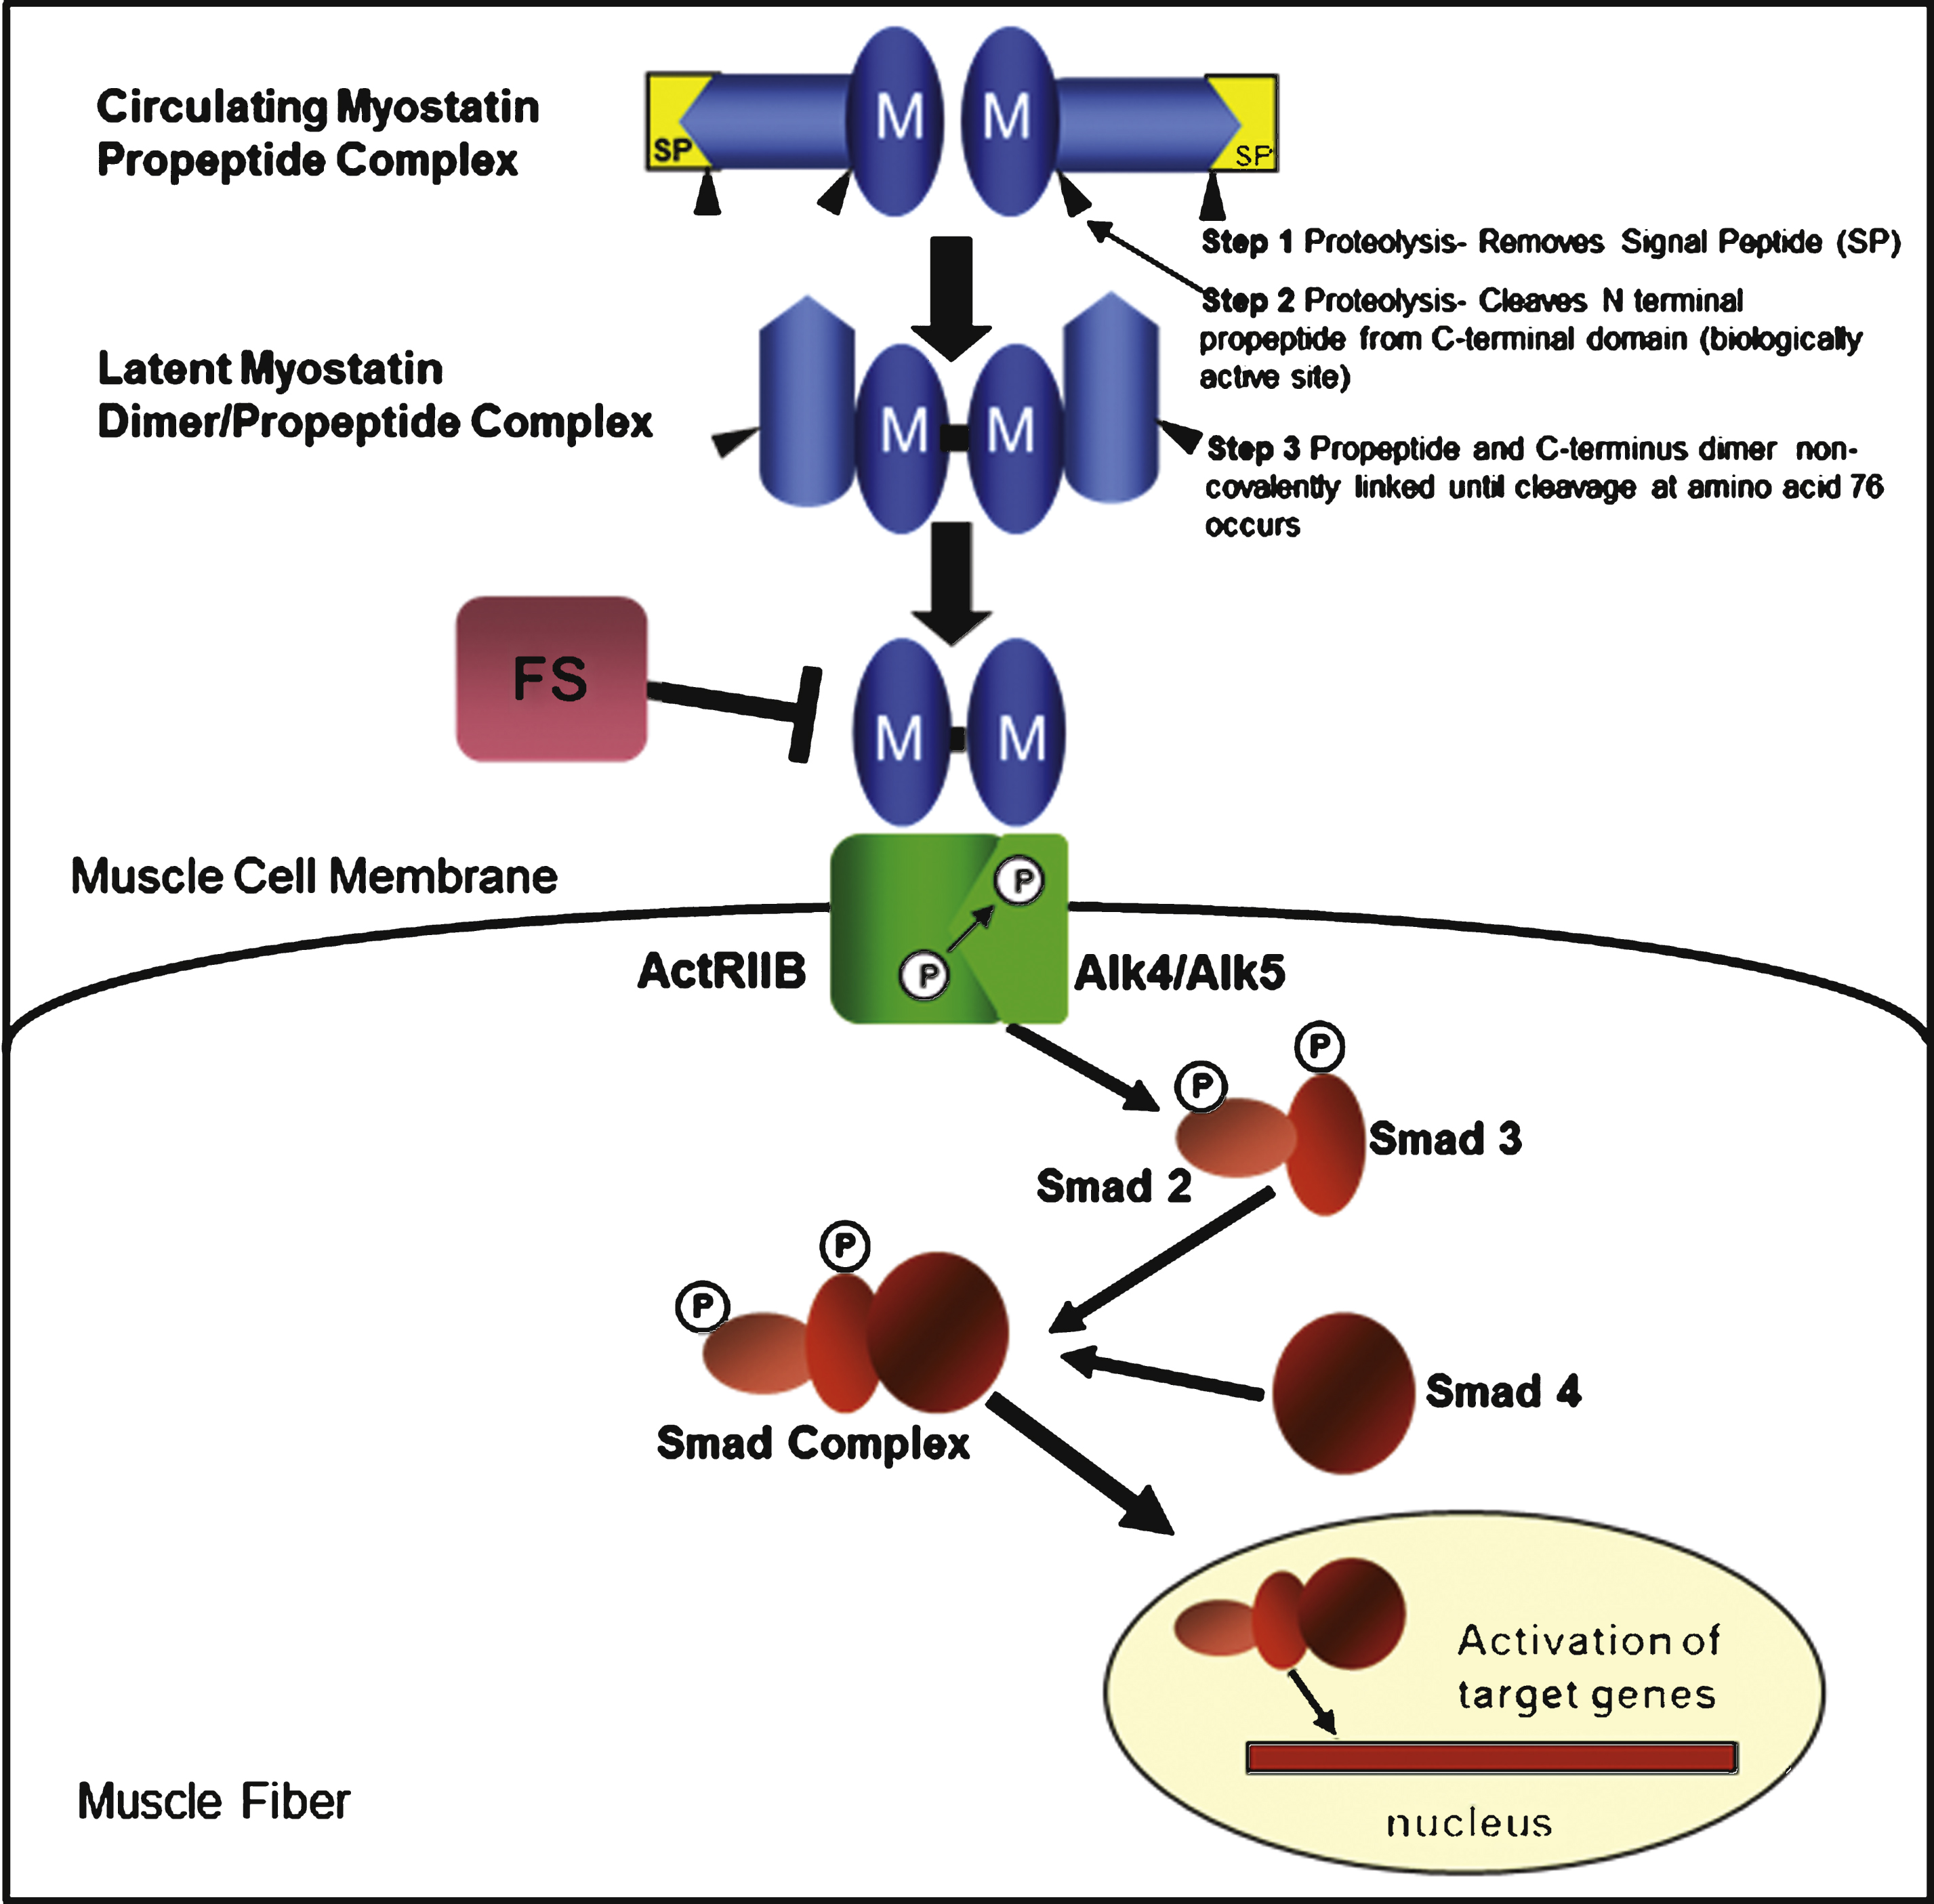 The myostatin pathway and myostatin-binding proteins. Myostatin (M) is synthesized as a precursor protein. Activation is regulated through a proteolytic process in which the signal peptide (SP) is first removed, followed by a second cleavage that releases two fragments: an N-terminal propeptide domain of ∼28kD and the biologically active 12.5 kD C-terminal domain. The myostatin C-terminus circulates in the blood in a latent inactive state. The final activation requires cleavage at amino acid 76 to prevent the propeptide from binding to the C-terminus. Once activated, the myostatin dimer binds to the activin receptor type IIB (ActRIIB), which then enhances the transphosphorylation of type I activin receptors (ALK4 or ALK5). The intracellular path is through a series of Smads (Smad 2 and Smad 3) leading to the formation of the Smad complex (inclusive of Smad 4) that enters the nucleus to activate target gene transcription. Several proteins, including follistatin (FS), follistatin-related gene (FLRG) and growth and differentiation factor-associated serum protein-1 (GASP-1), have the ability to bind to myostatin leading to its inactivation and inhibition of the myostatin pathway.